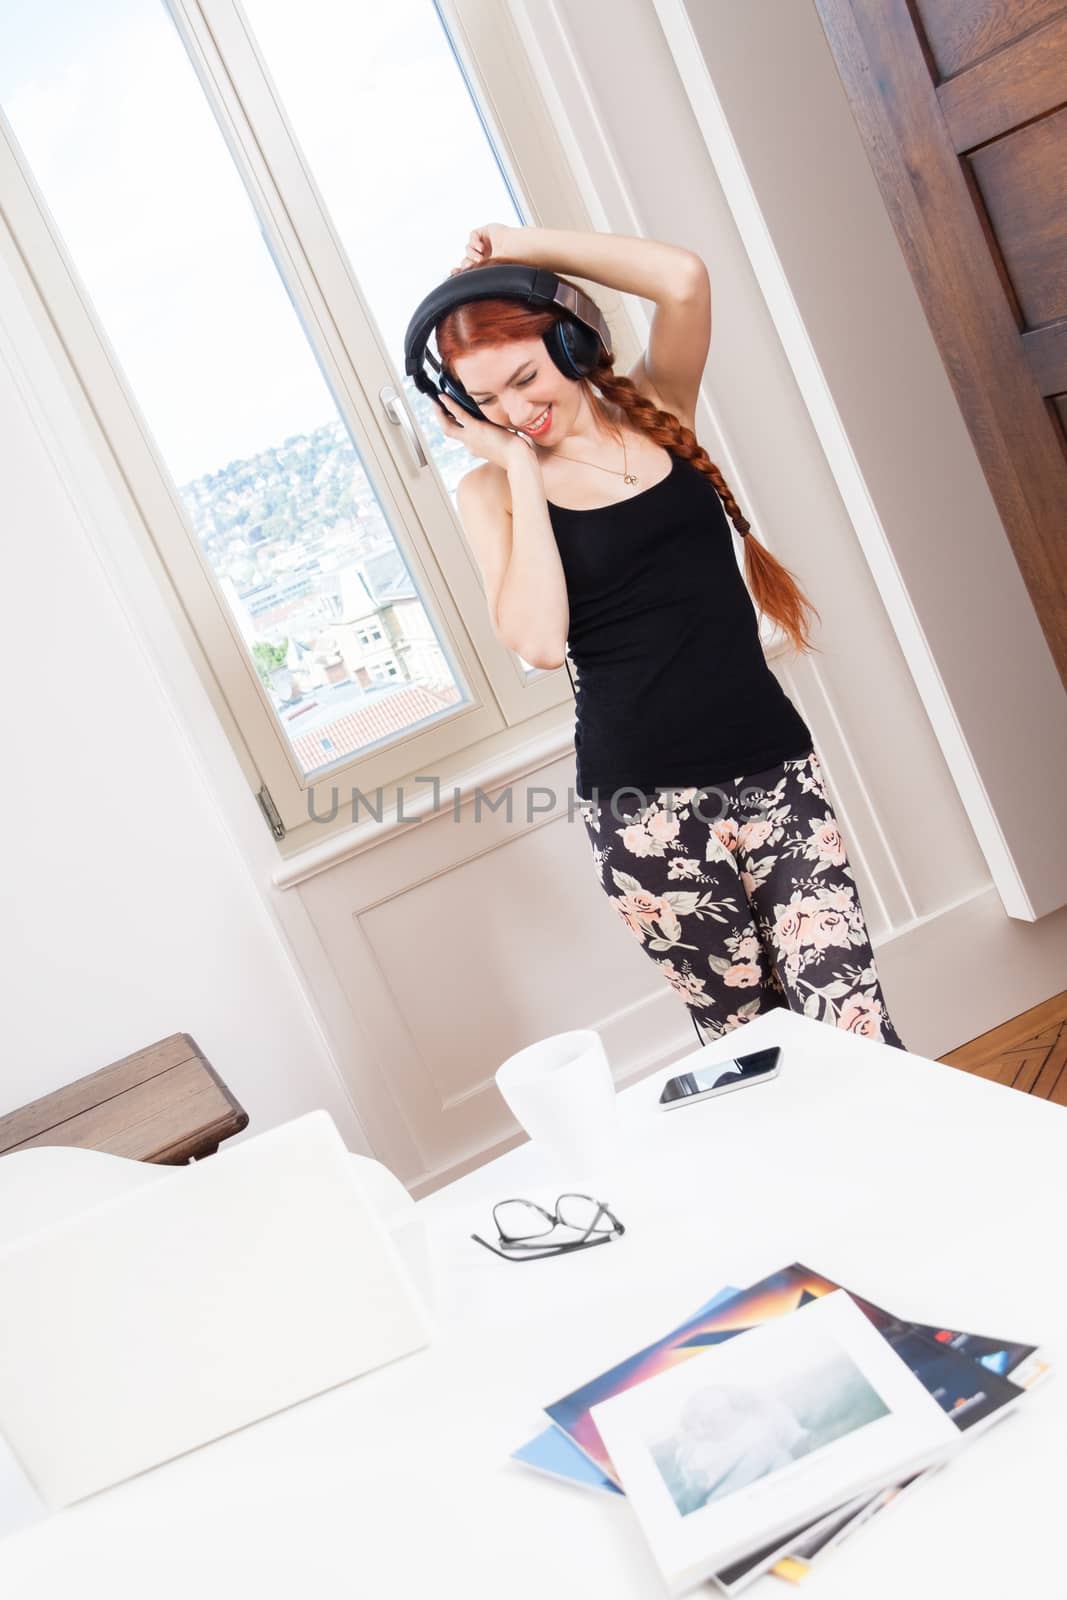 Woman Dancing While Listening Music on Headphone by juniart